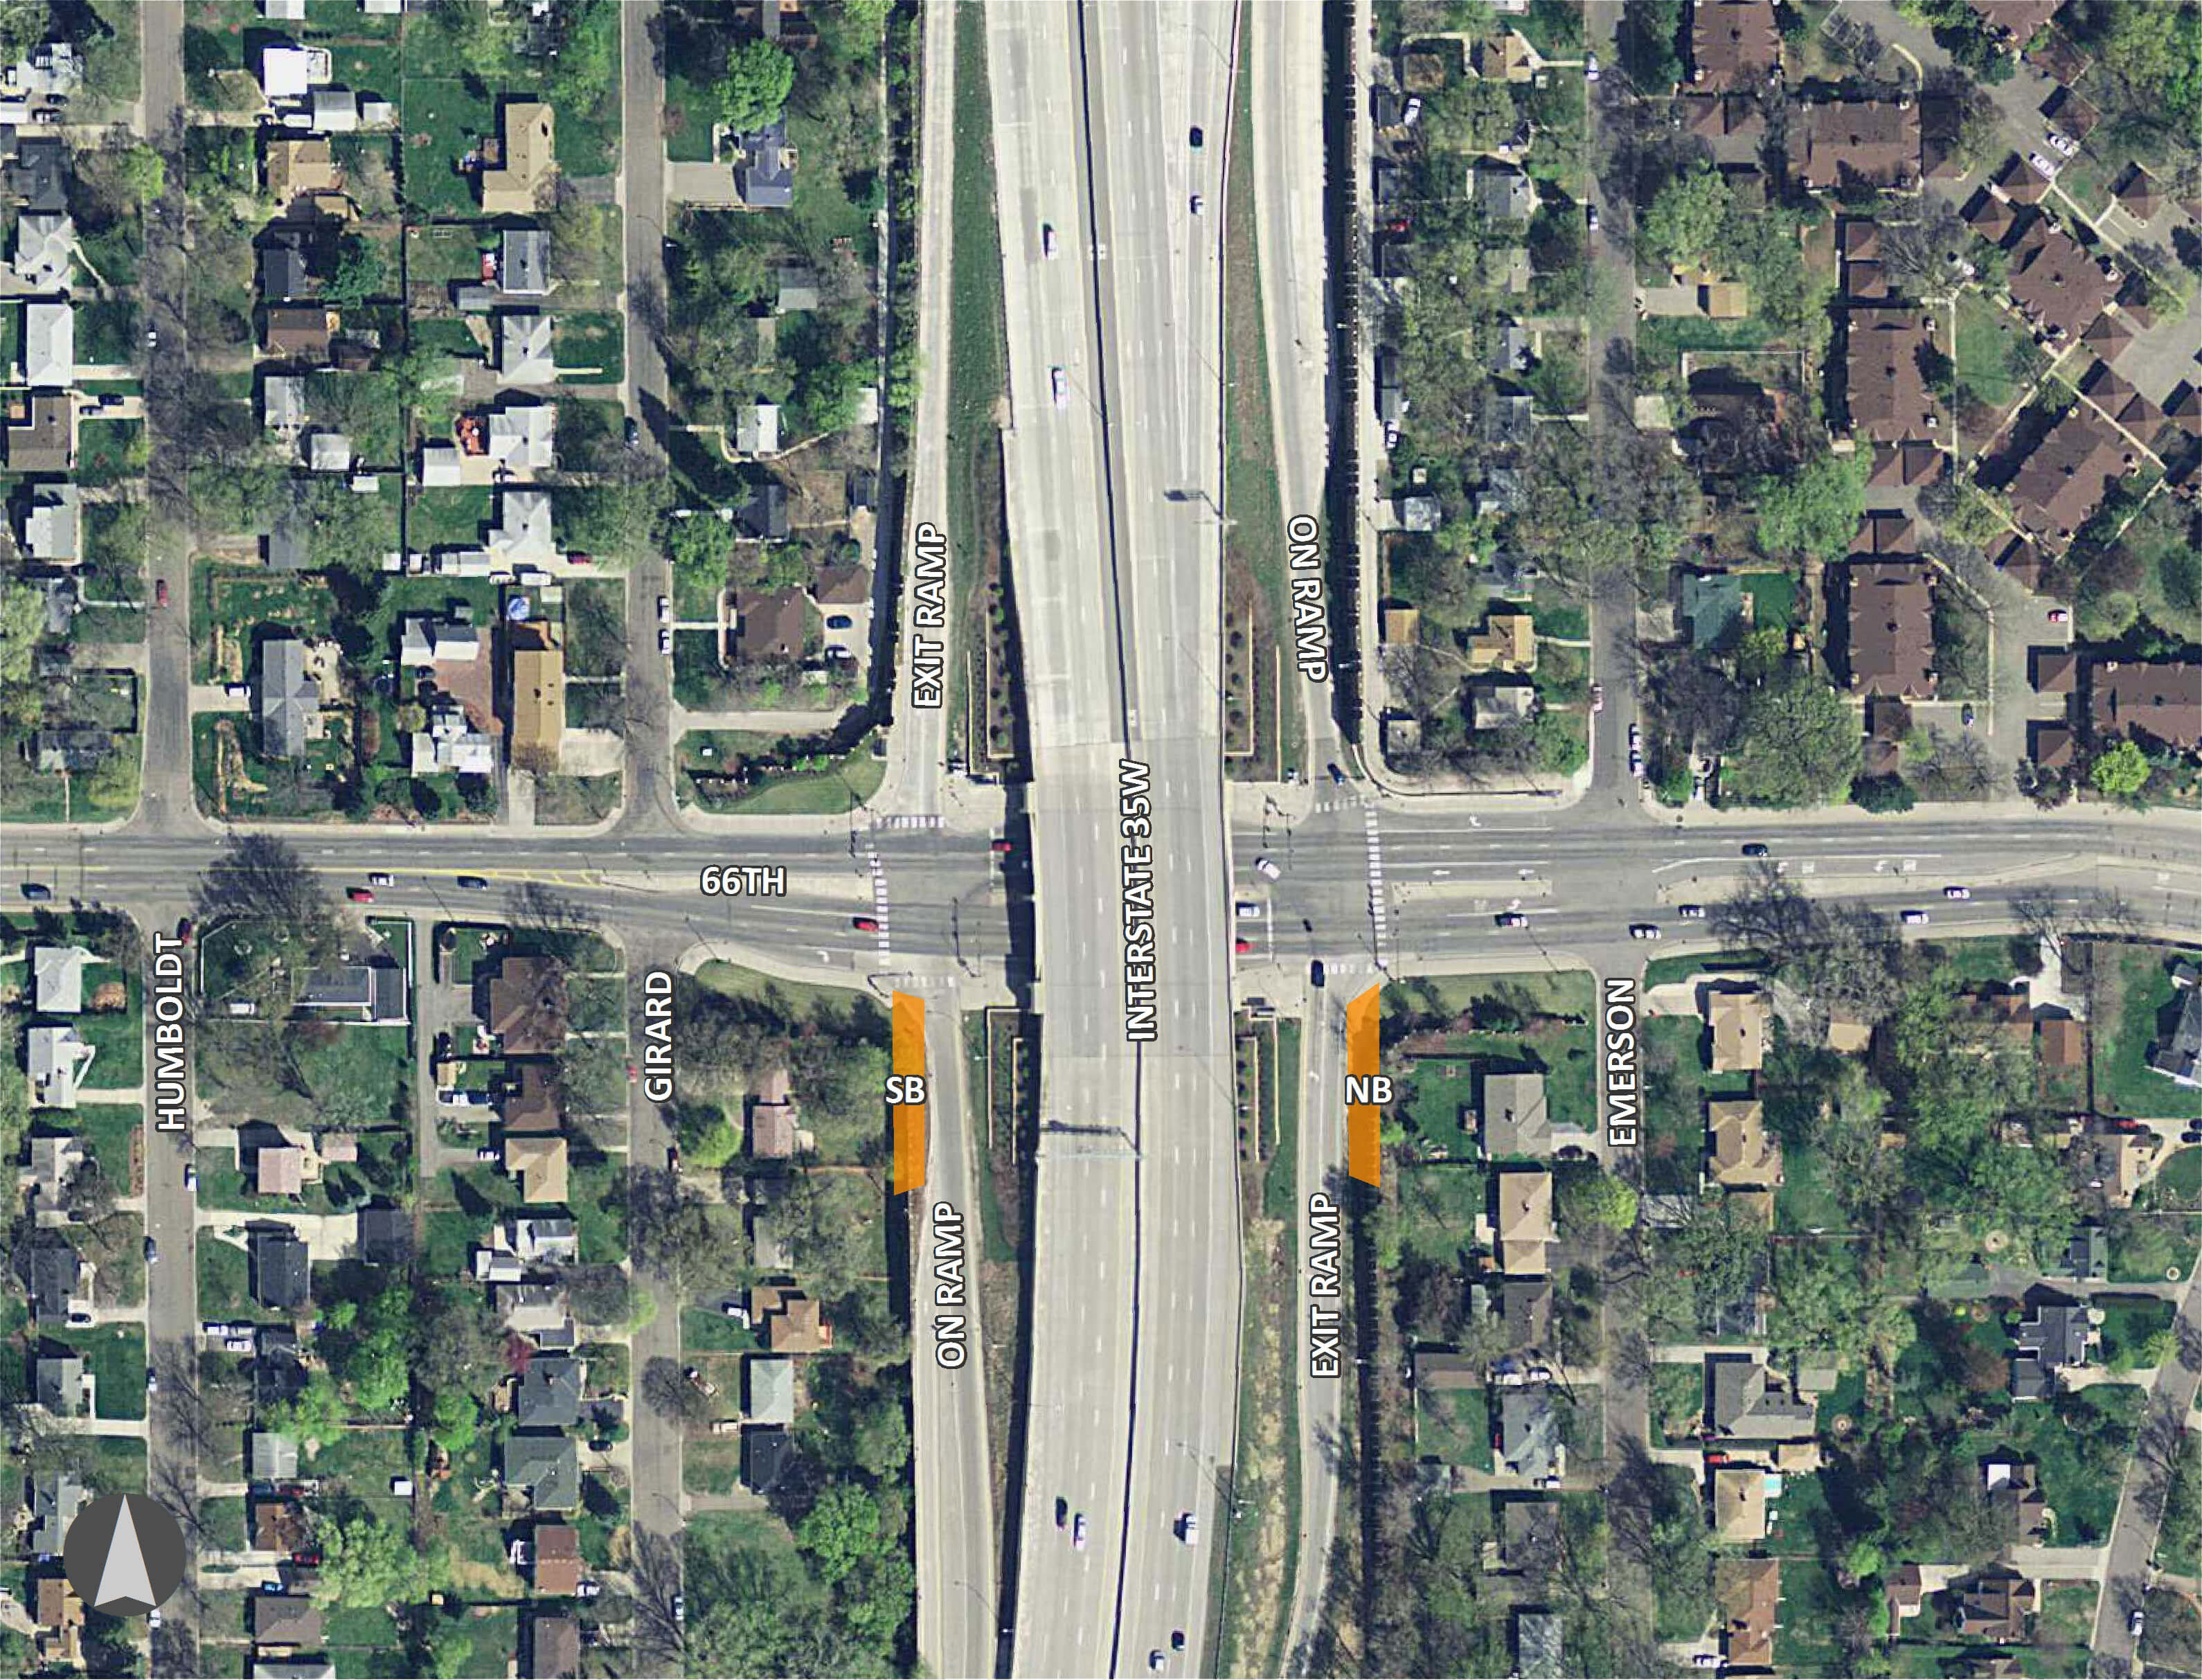 66th Street Station Aerial map